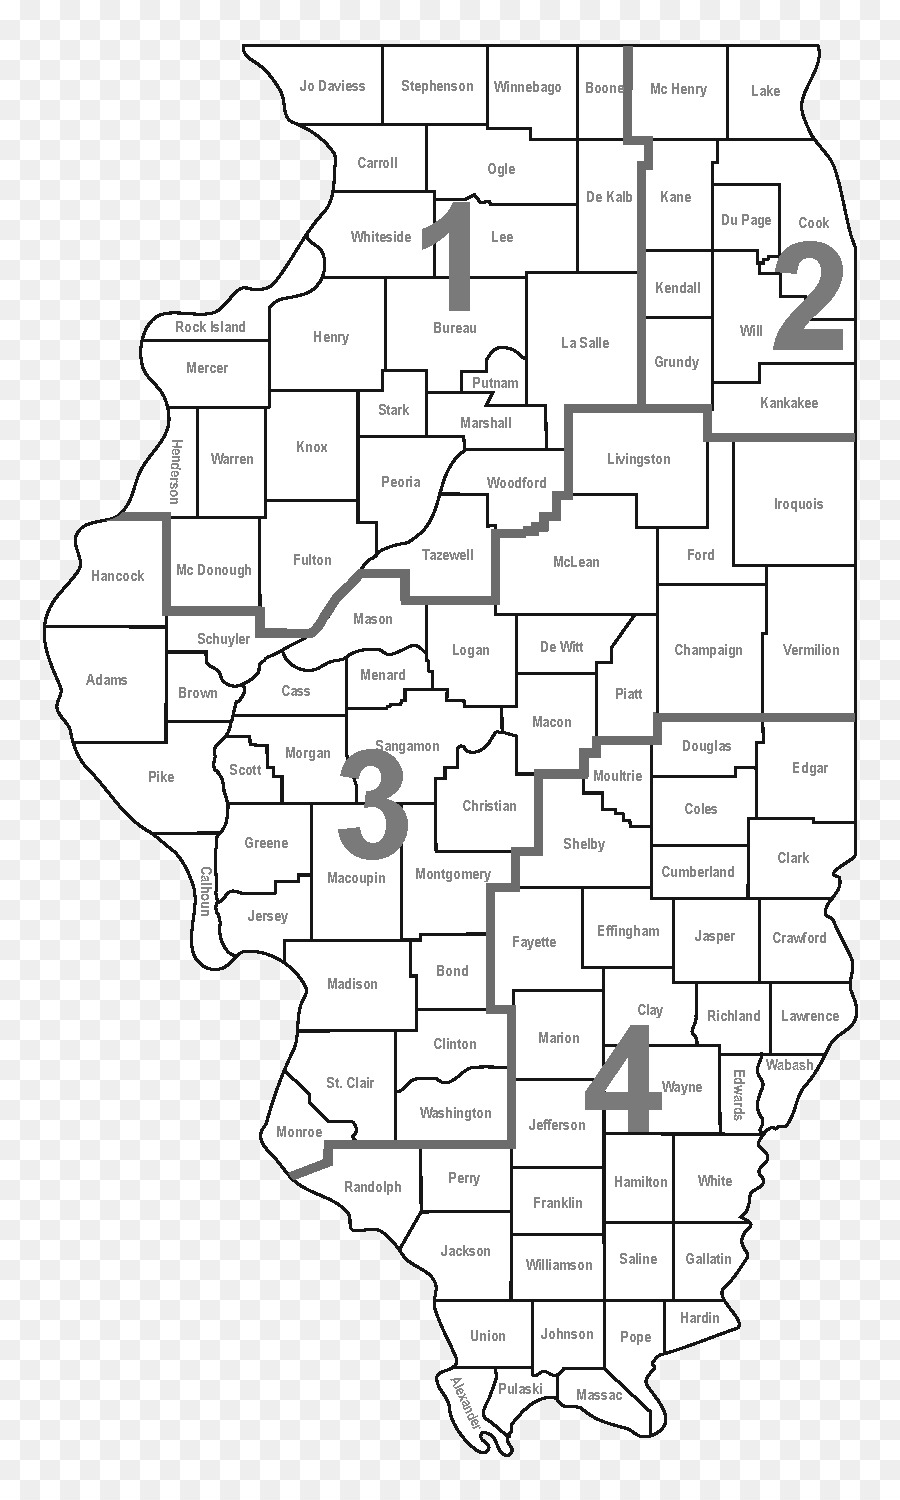 Iroquois County, Illinois, Coles County, Illinois, Northeastern Illinois University in Illinois Department of Natural Resources - Elmore County öffentliches Schul System